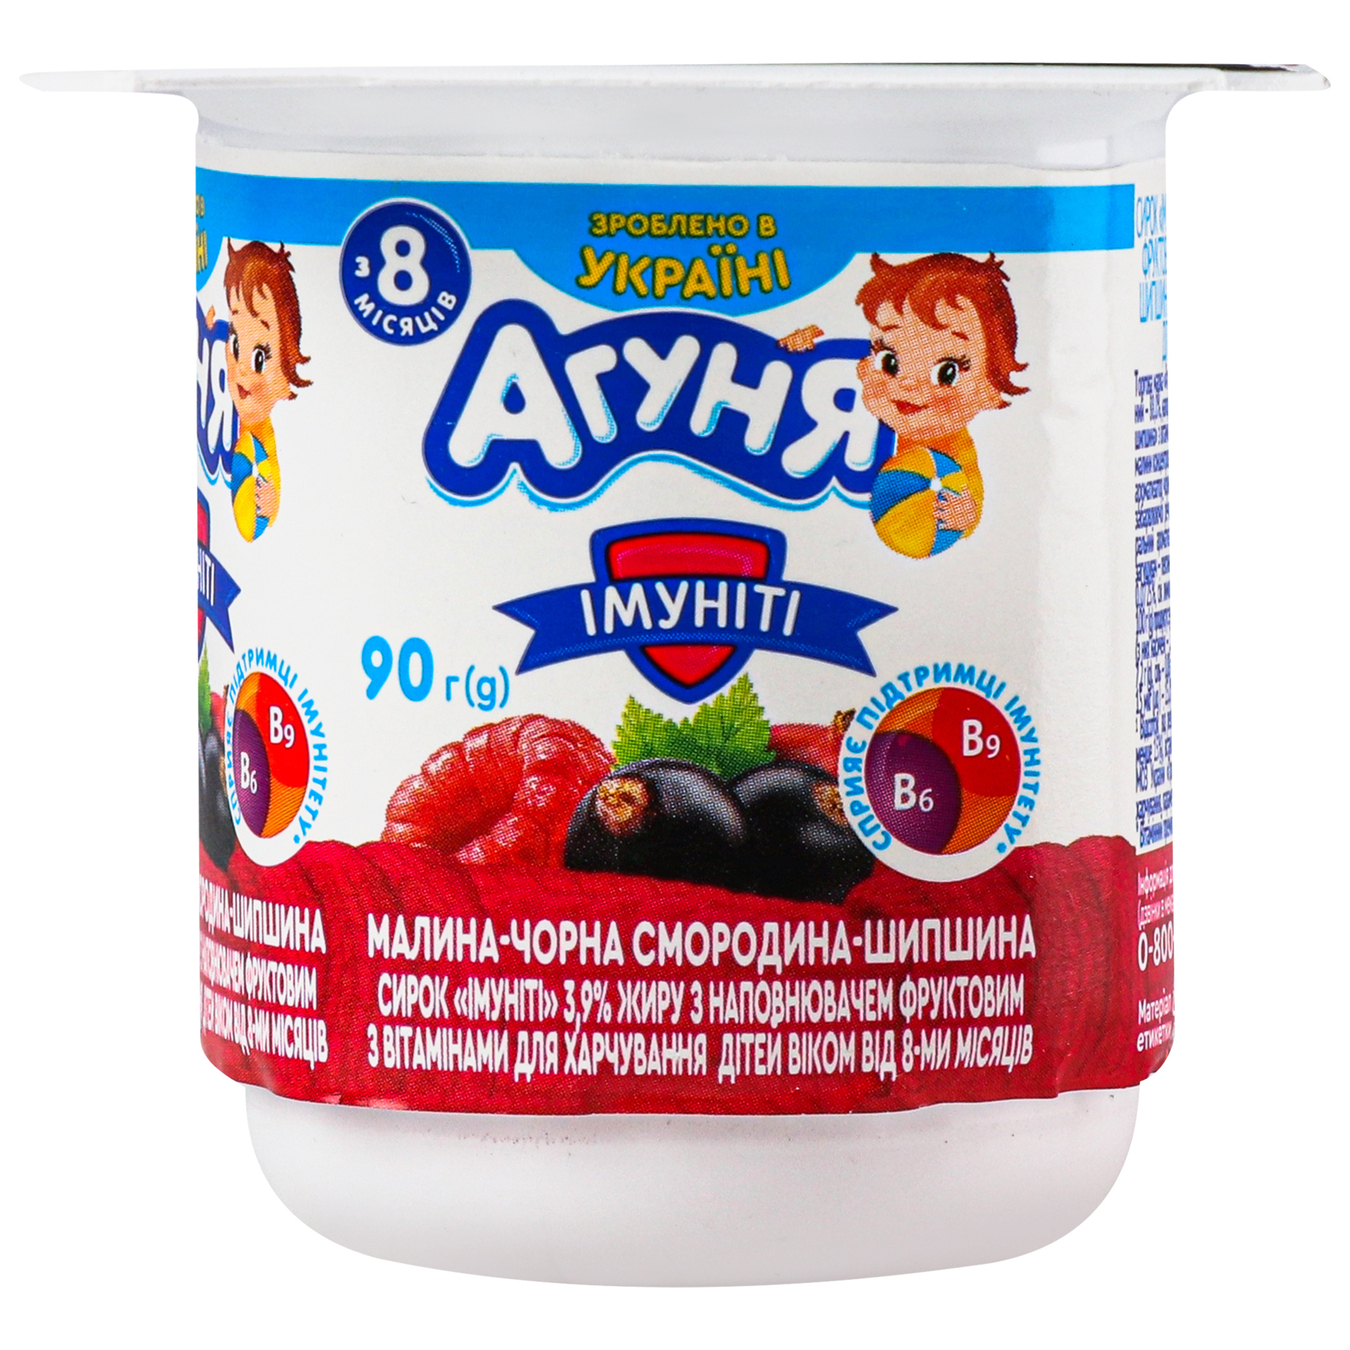 Cottage cheese Agunya Immunity child from 8 months 3.9% 90g